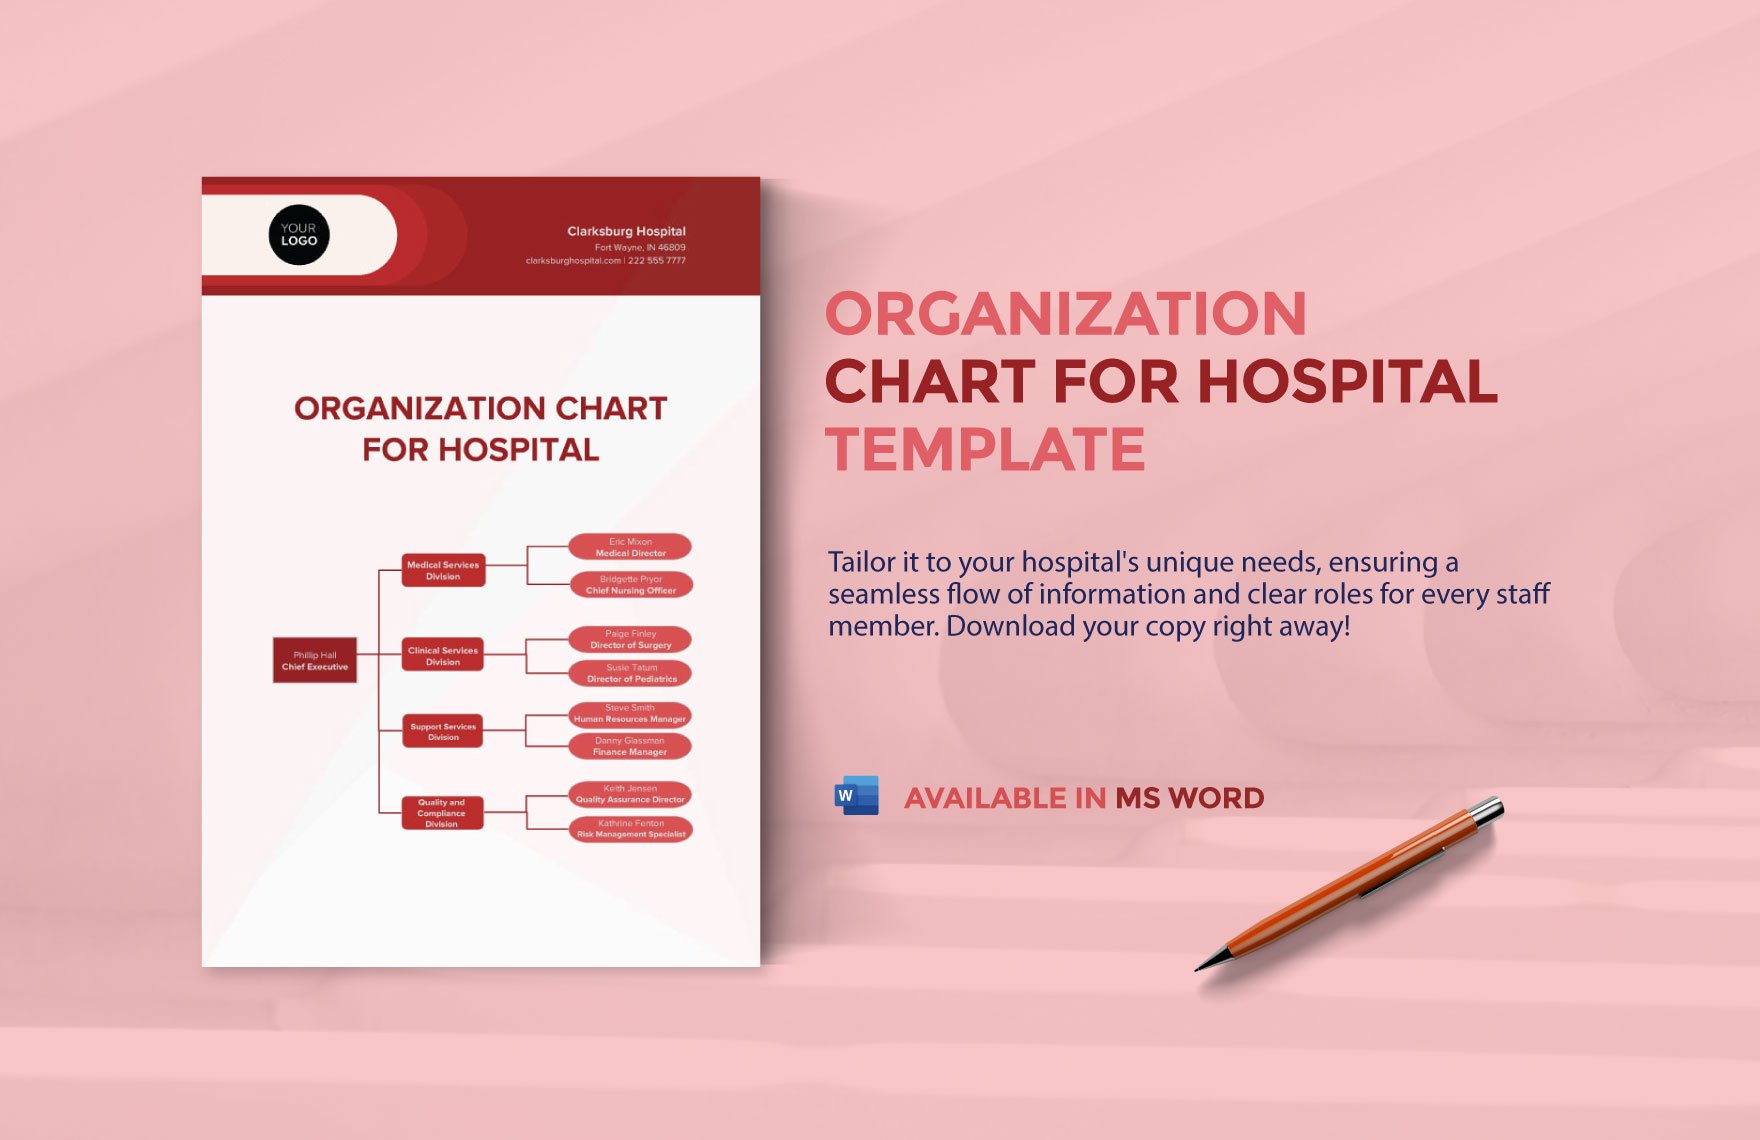 Organization Chart for Hospital Template